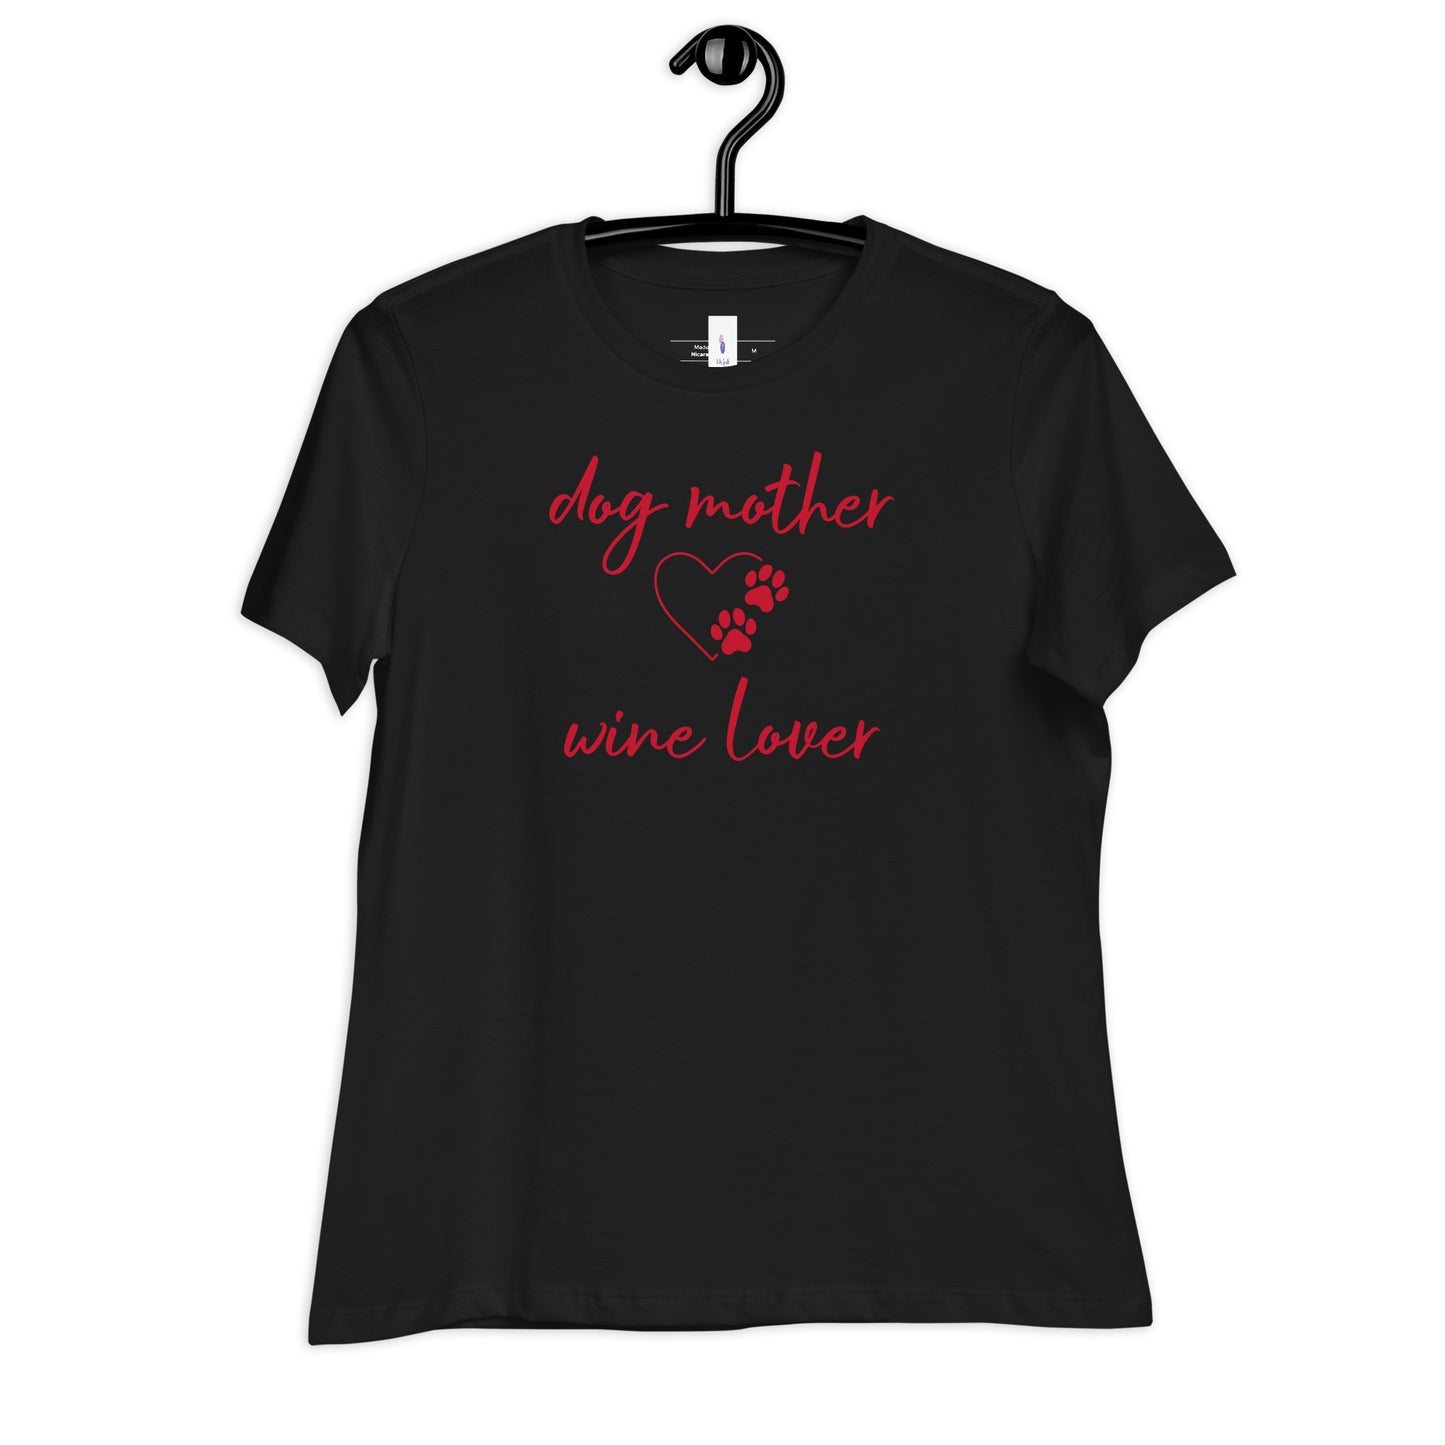 Dog Mother Wine Lover Cotton Tee